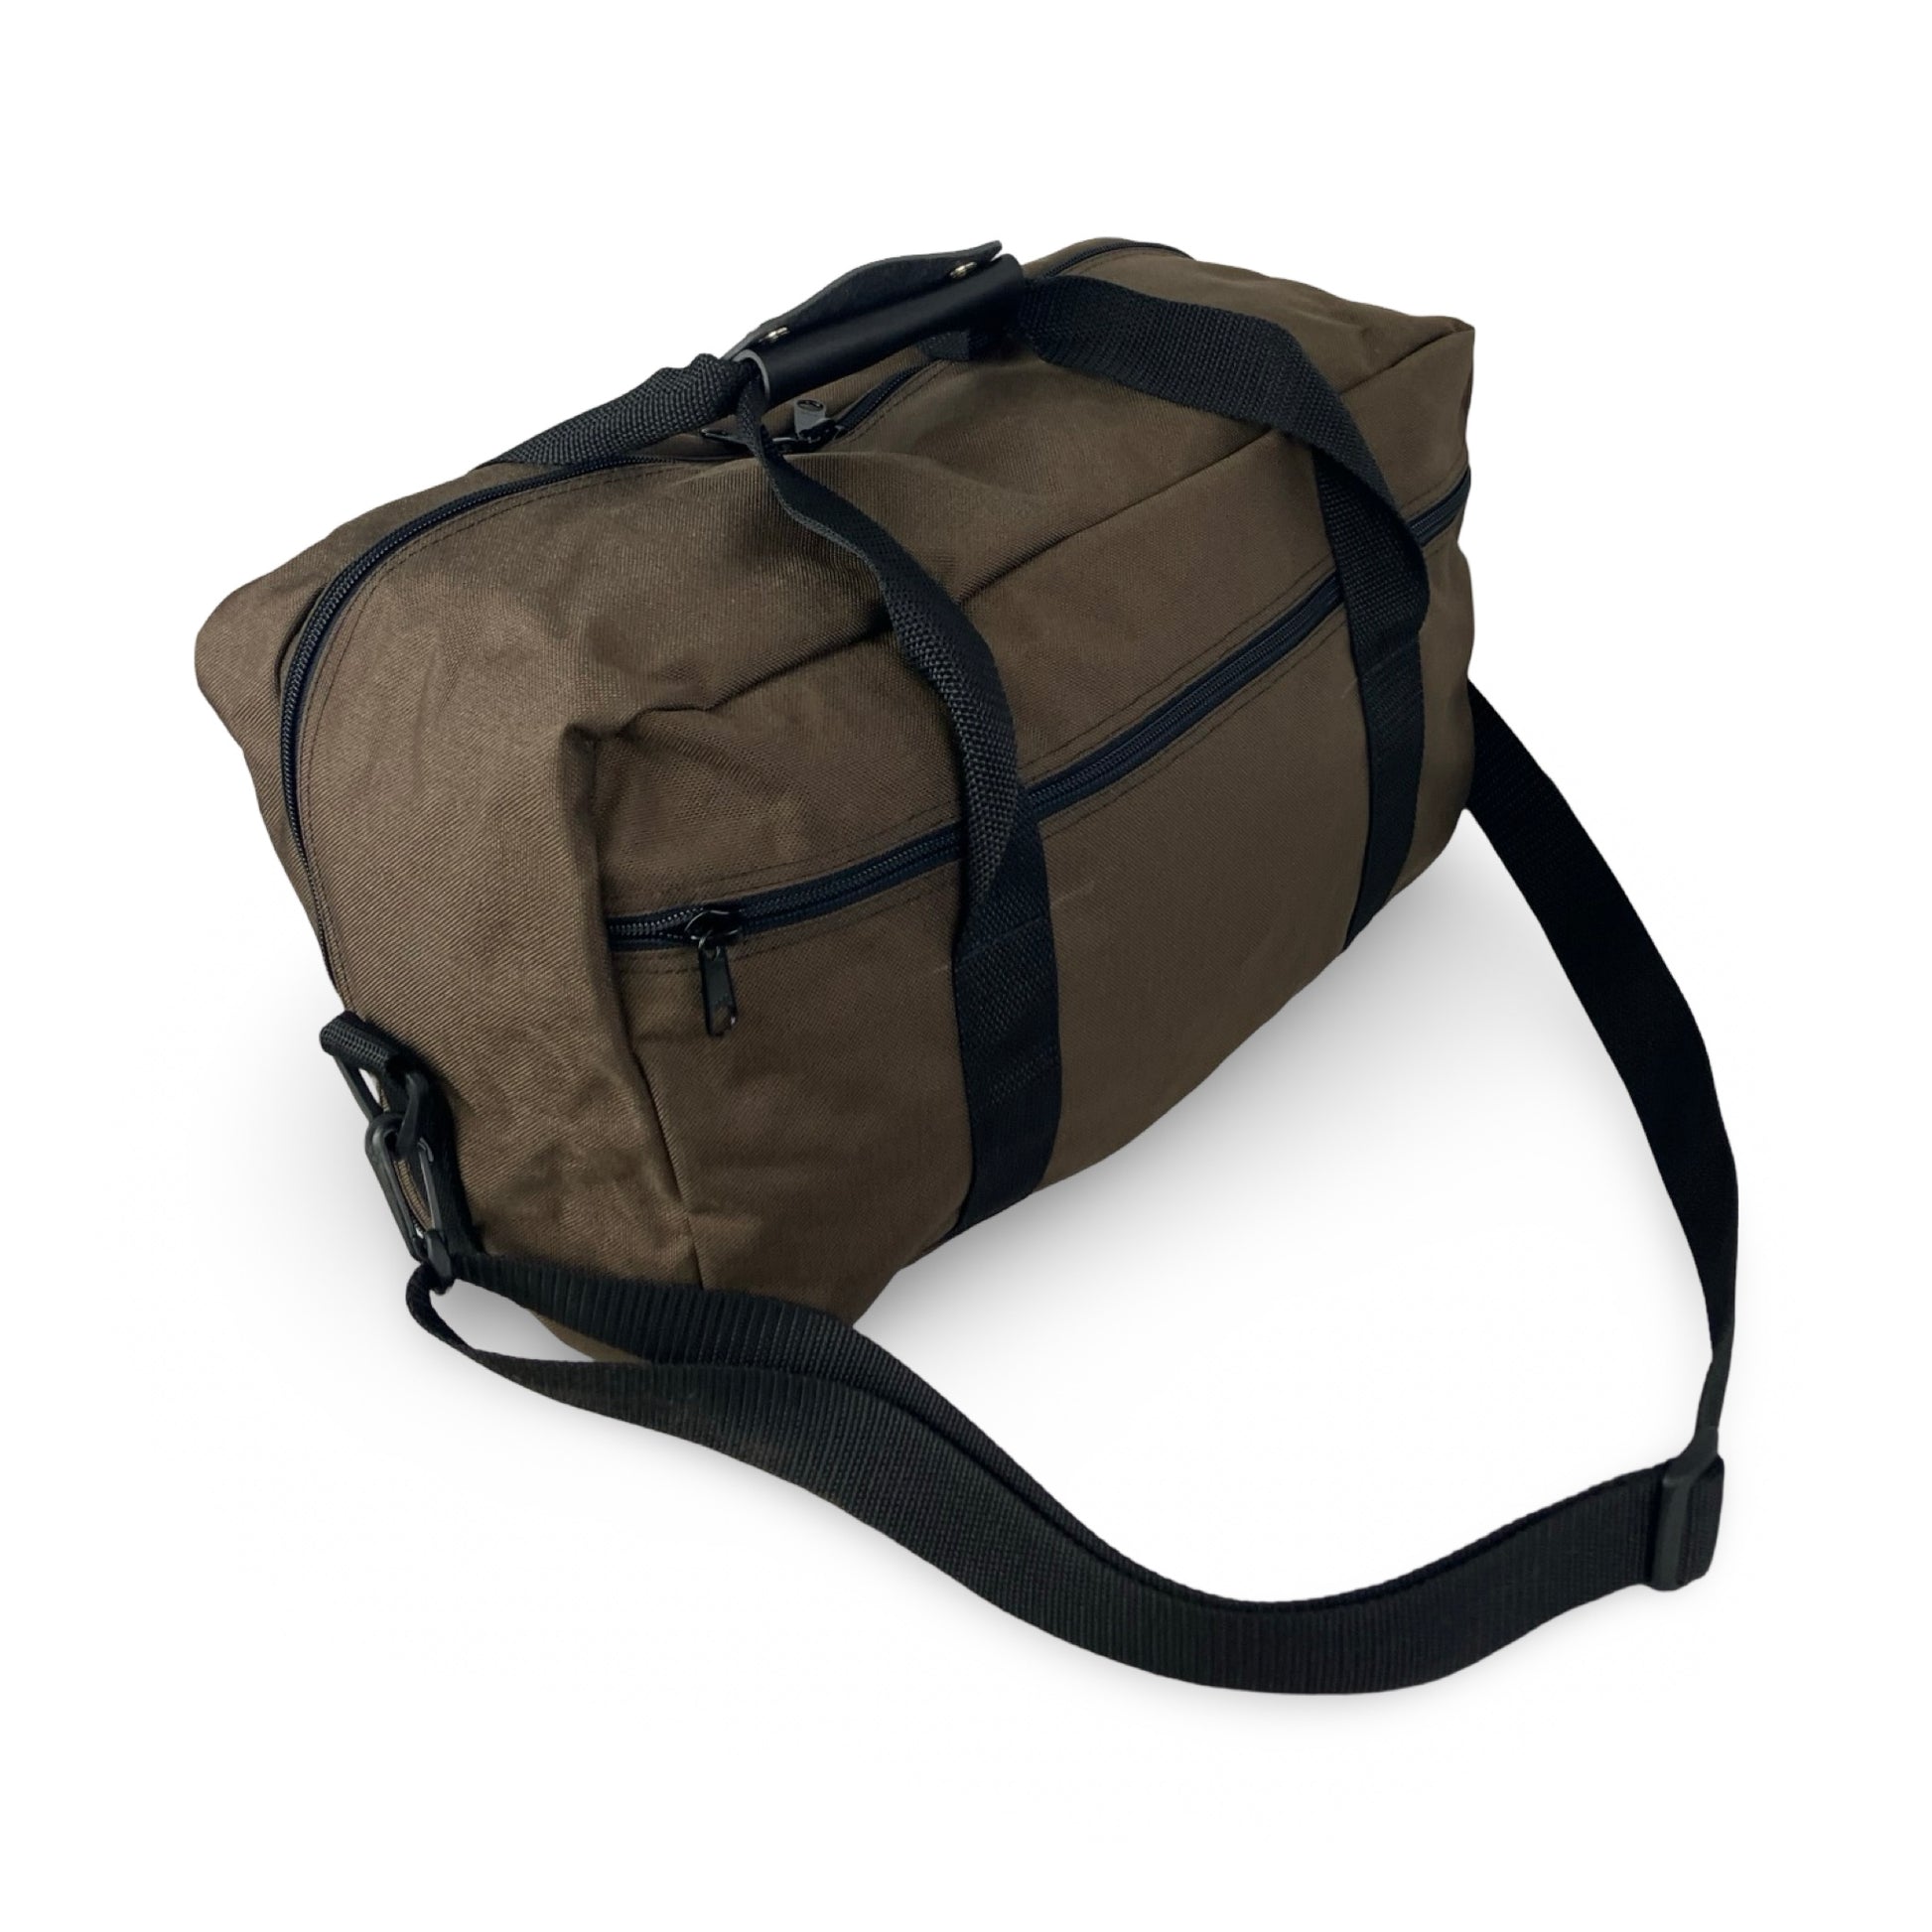 FLIGHT BAG Personal Bag Carry-on Luggage, by Tough Traveler. Made in USA since 1970